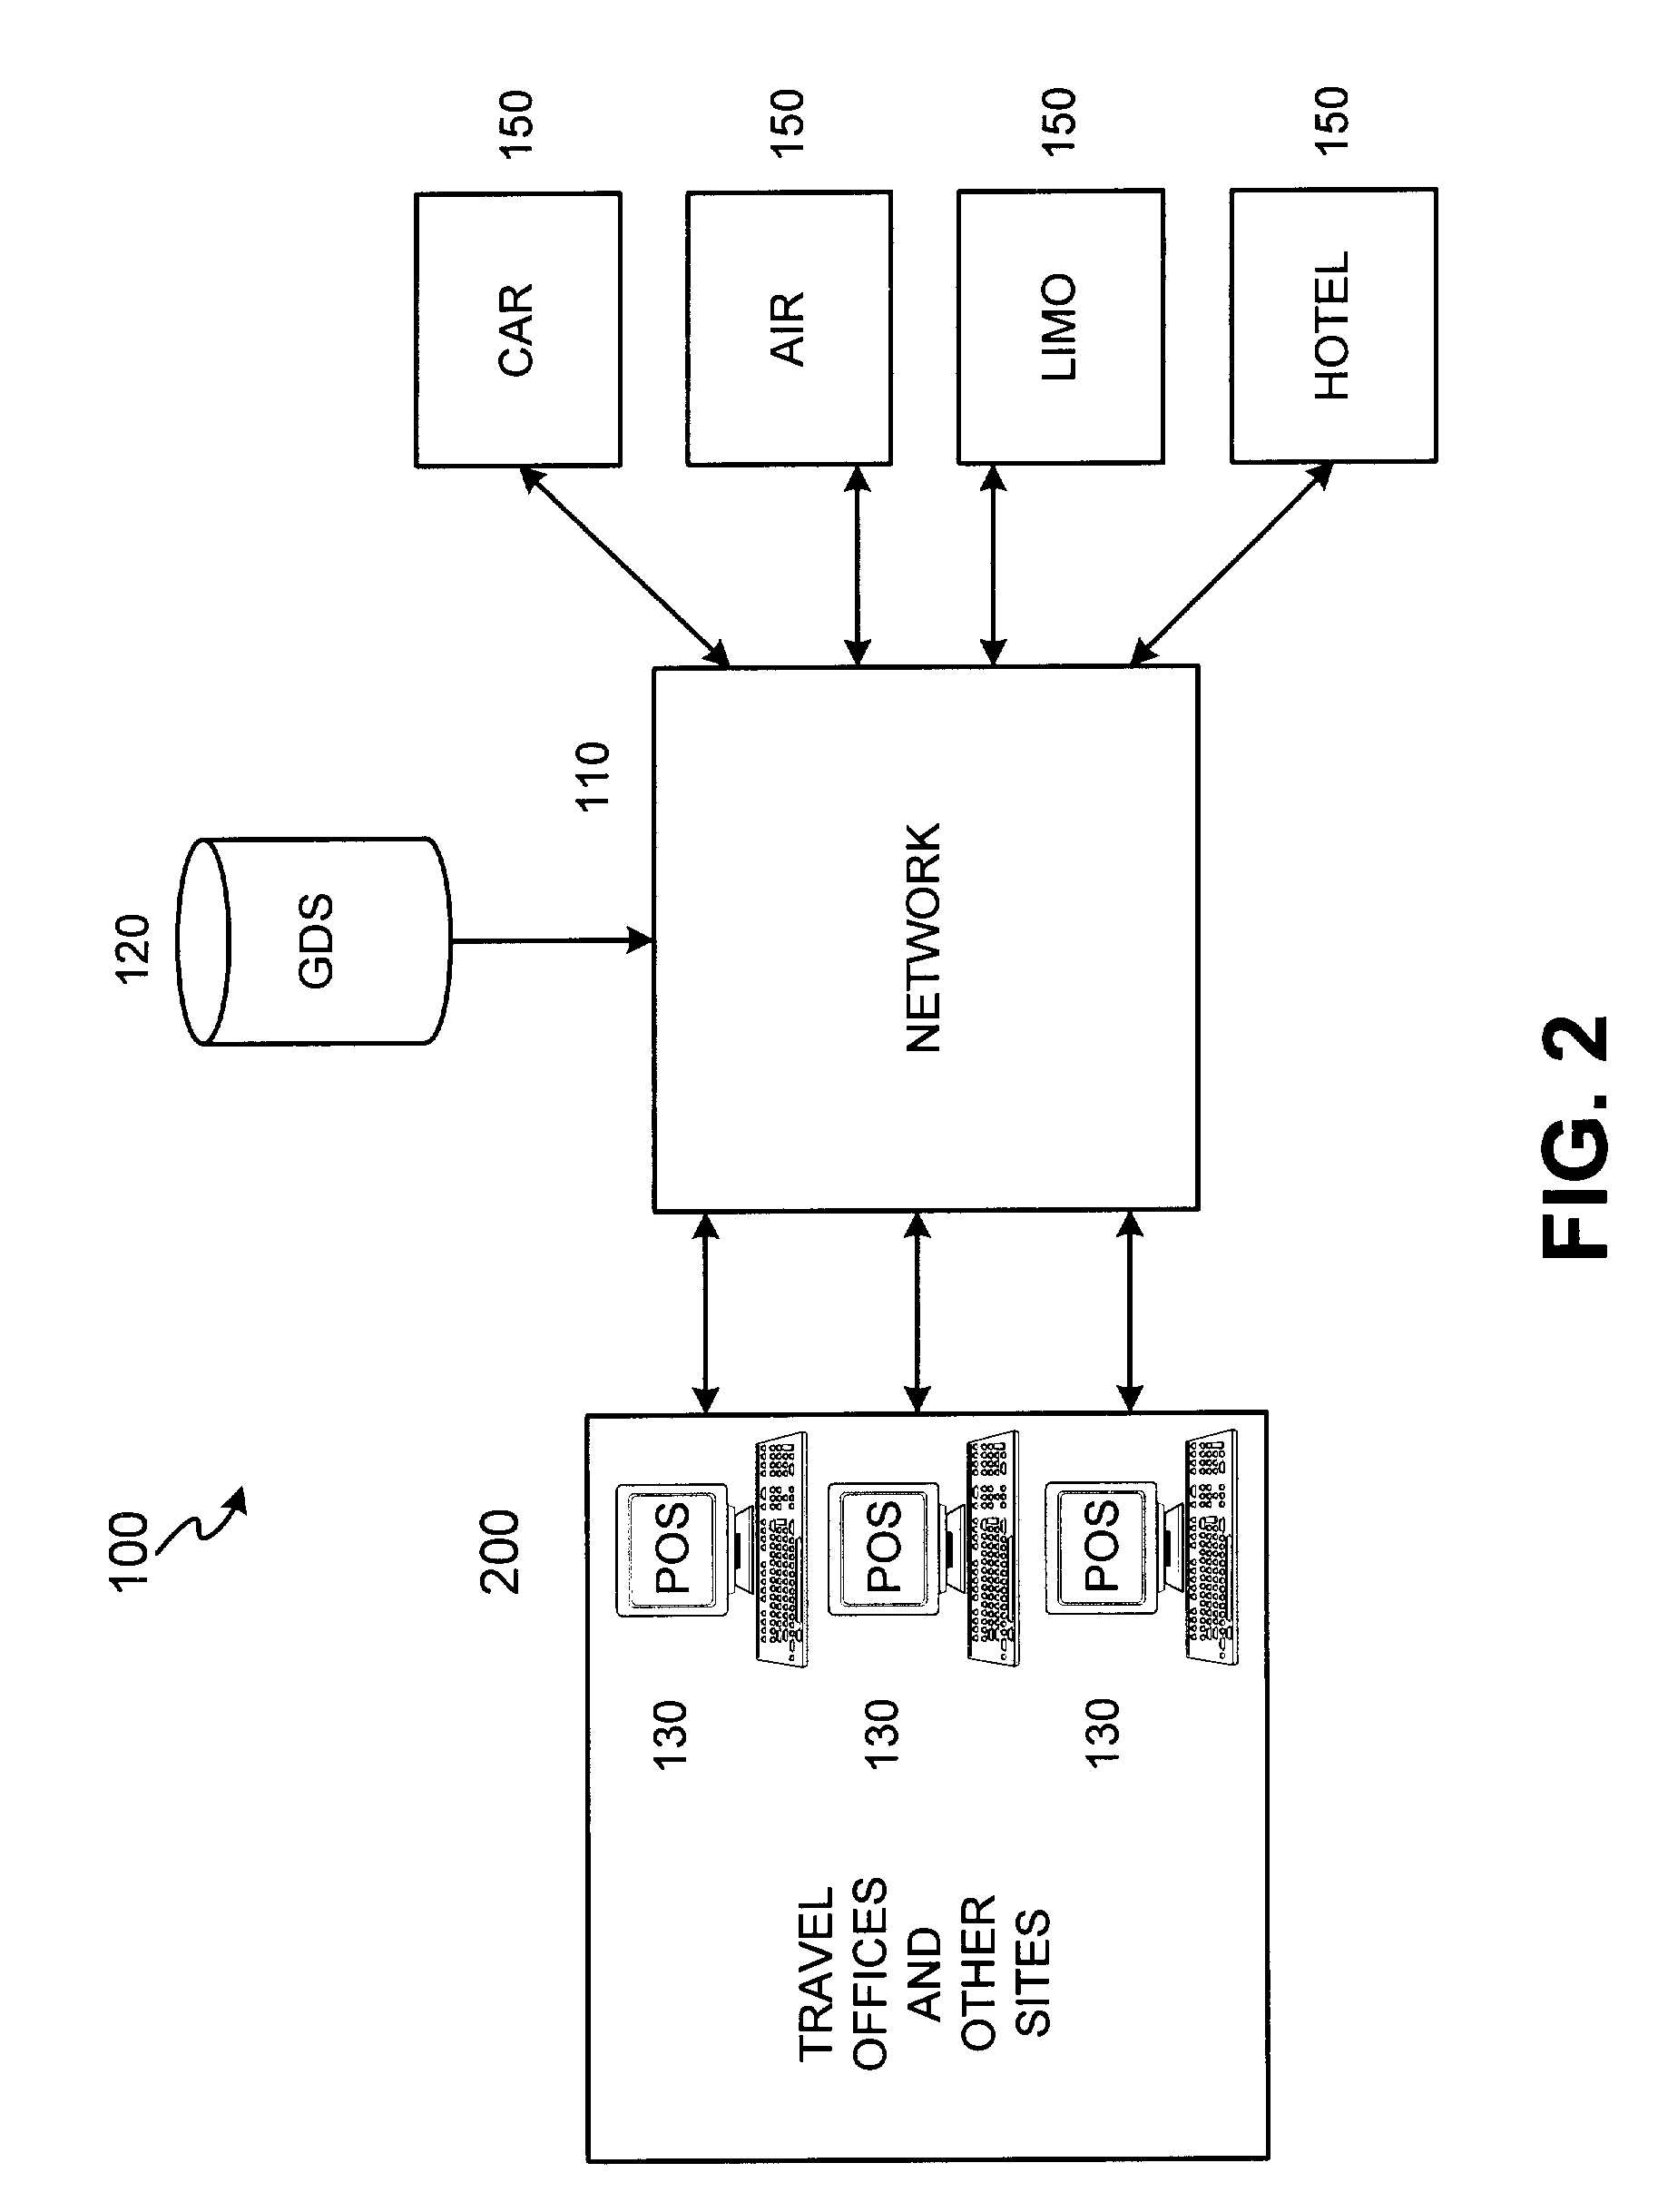 System for consumer travel service channel integration